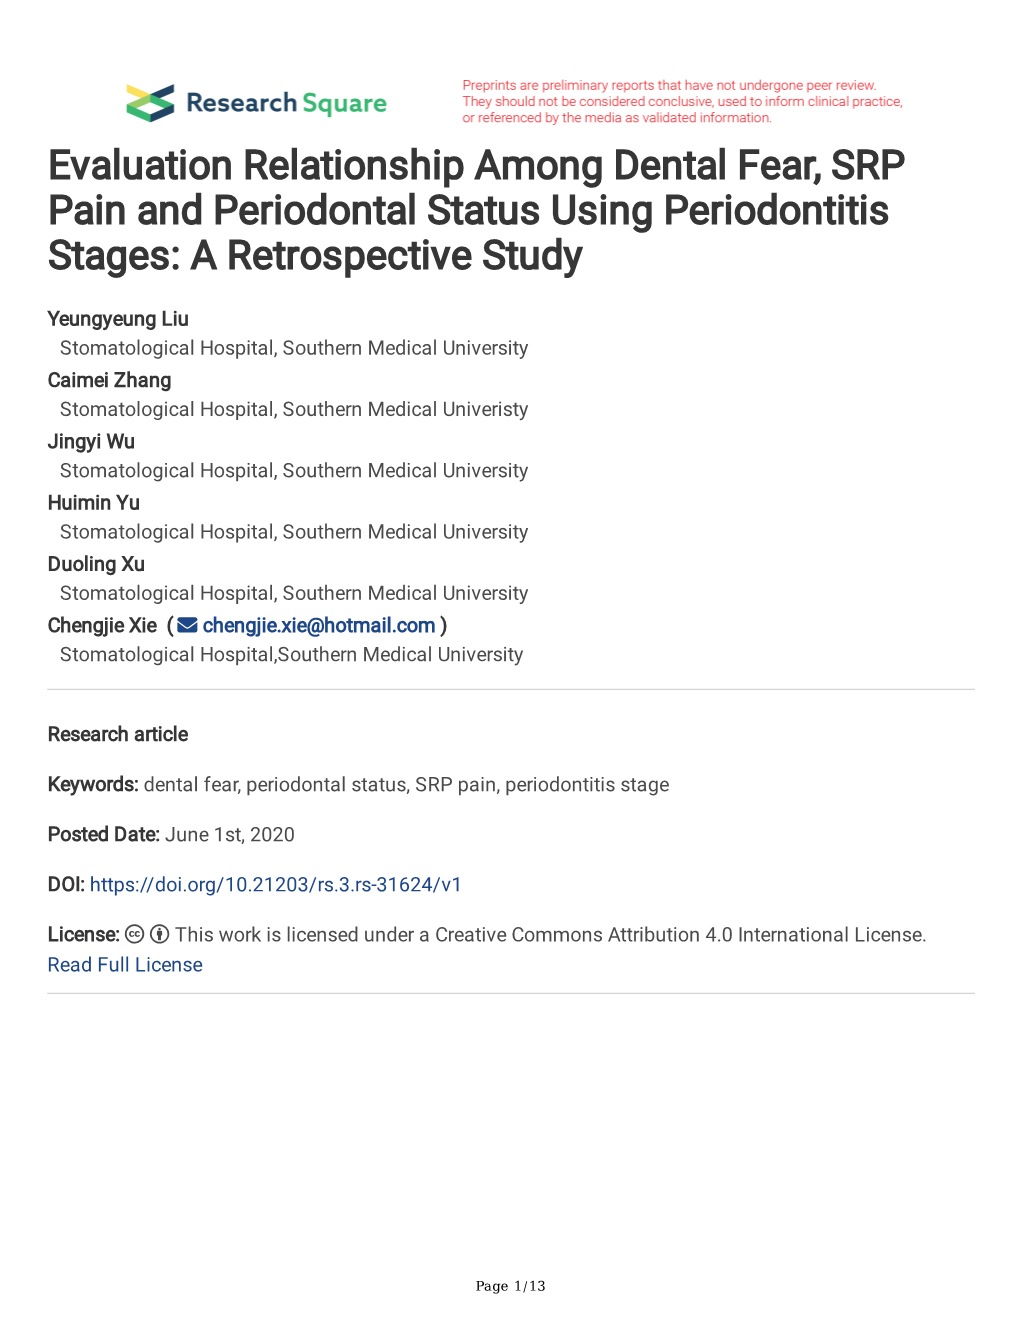 Evaluation Relationship Among Dental Fear, SRP Pain and Periodontal Status Using Periodontitis Stages: a Retrospective Study